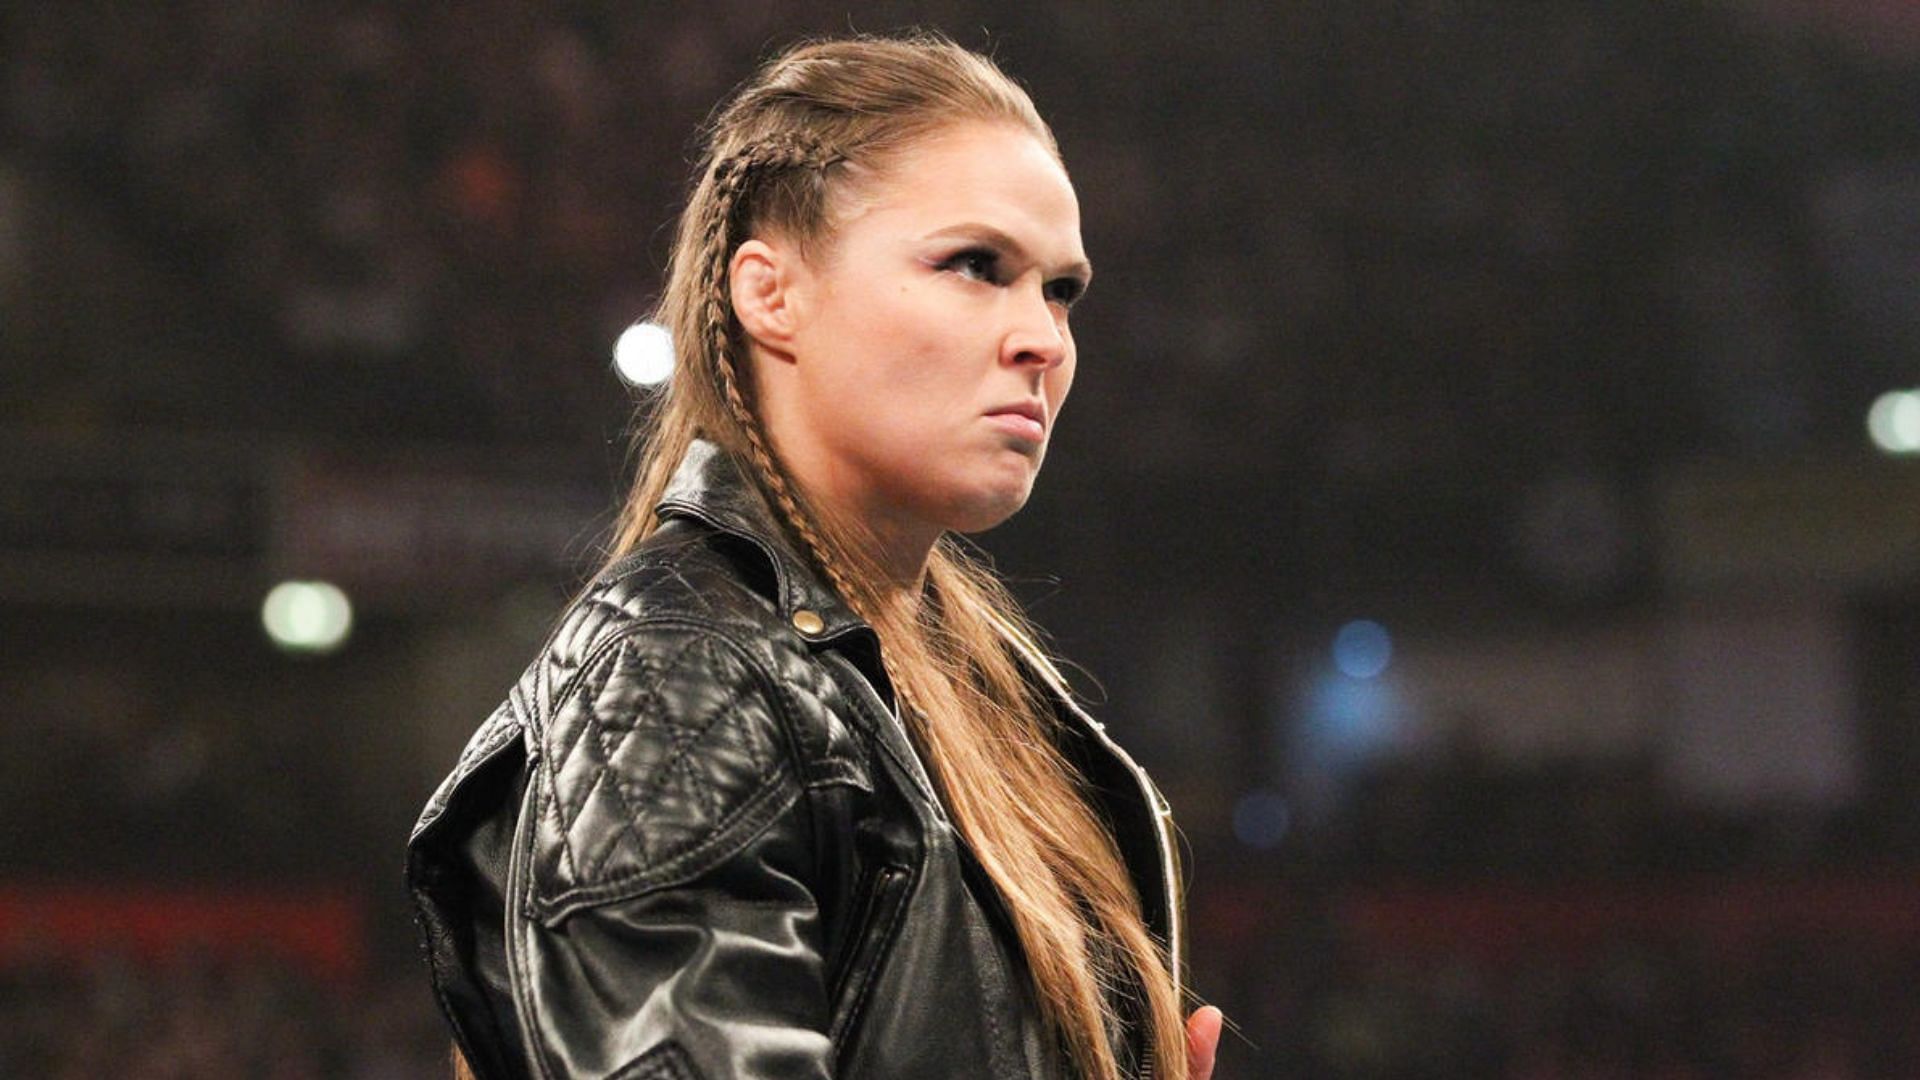 Ronda Rousey is a two time SmackDown Women